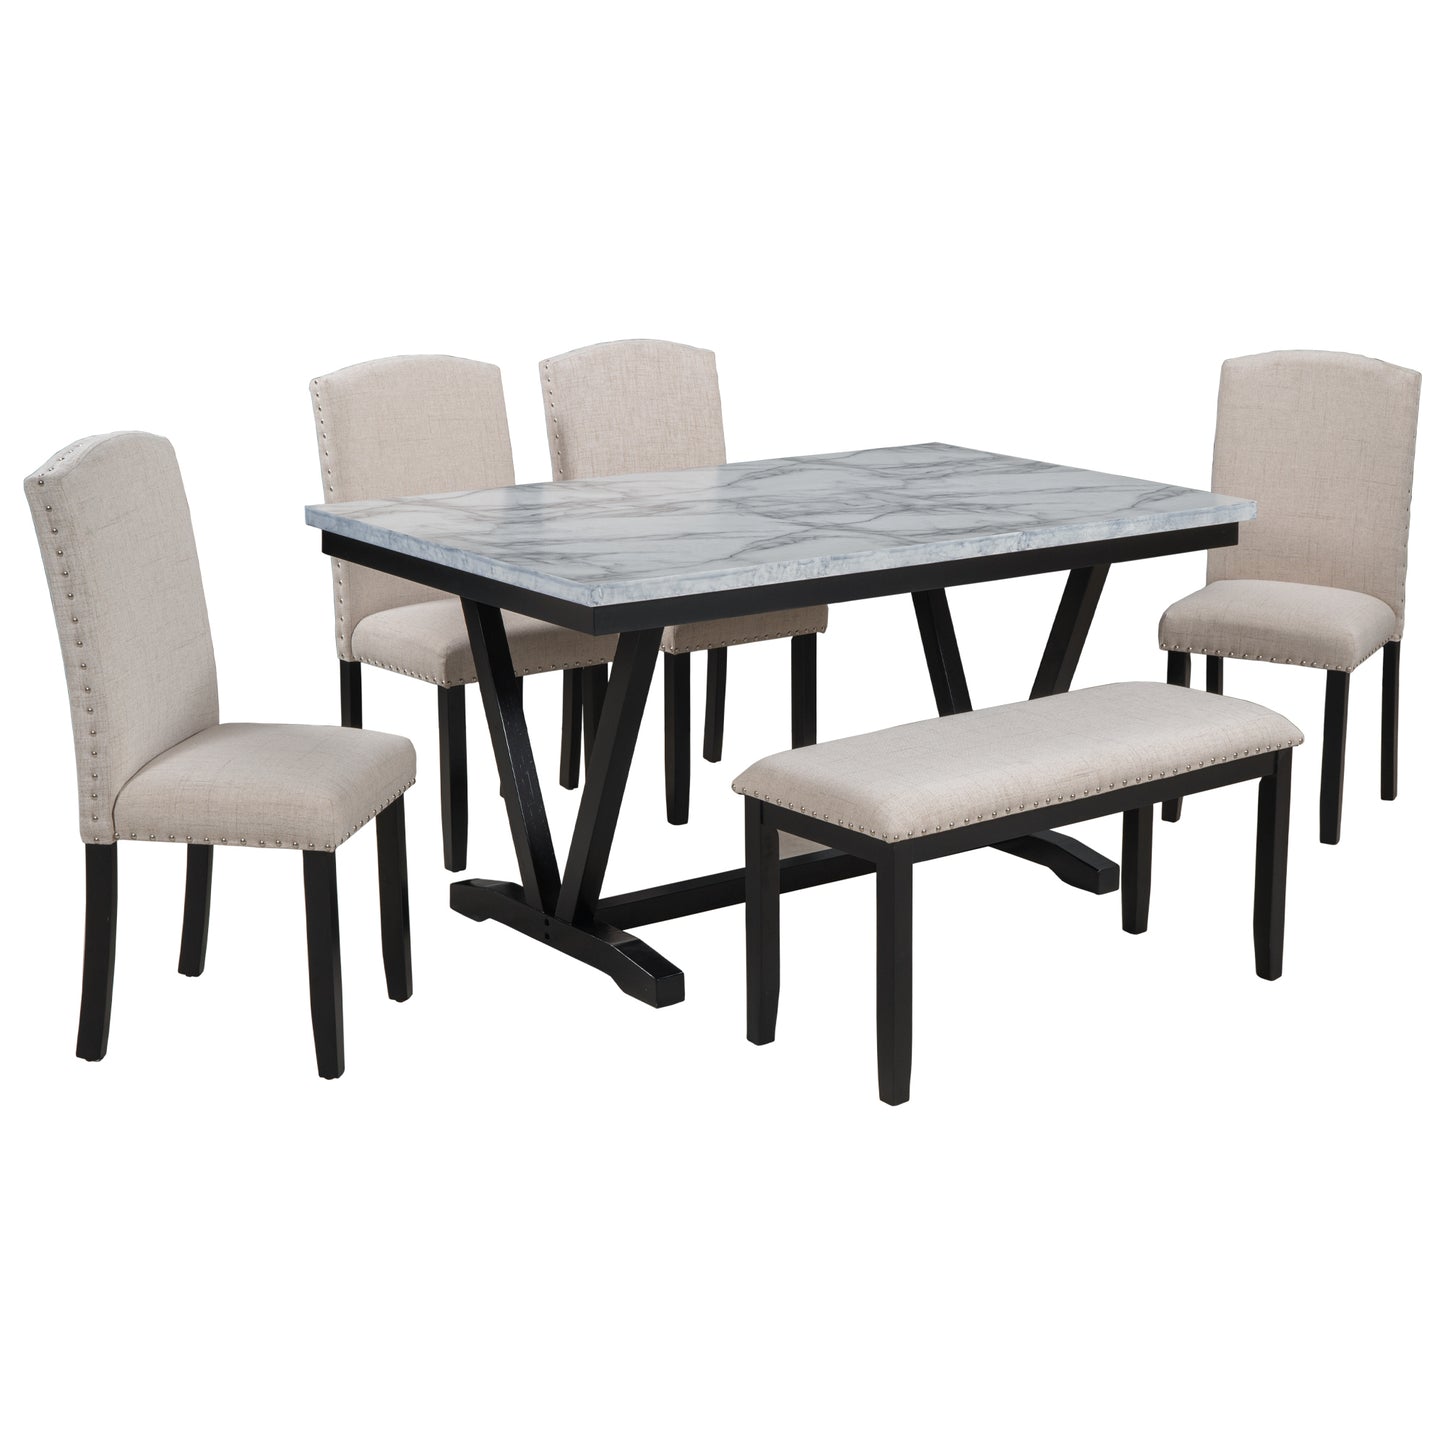 Necie Style 6-piece Dining Table with 4 Chairs & 1 Bench